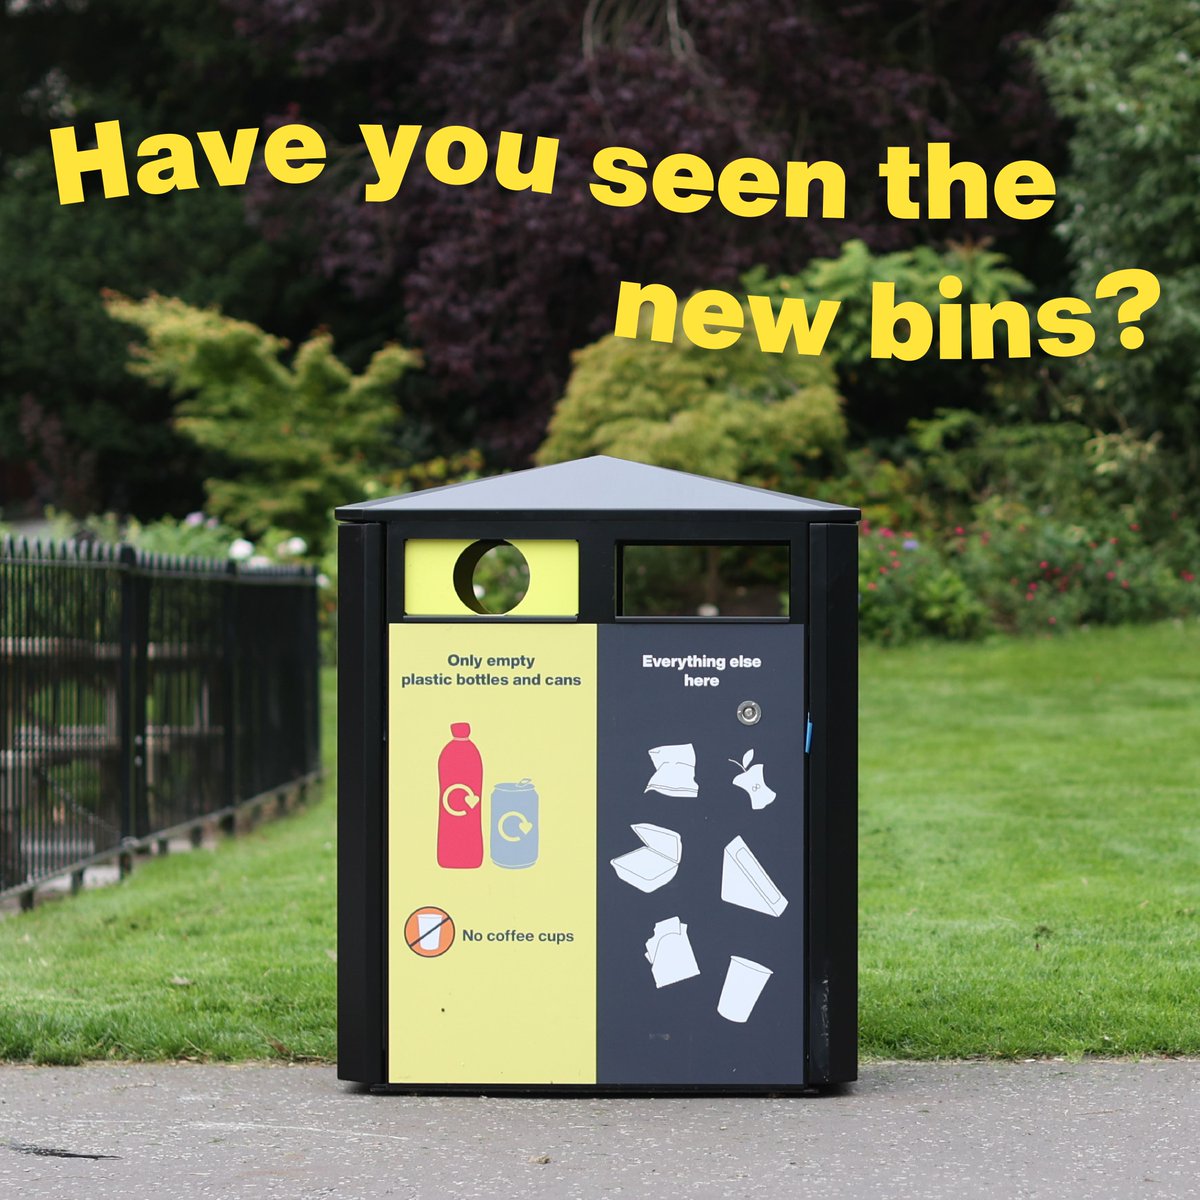 Spotted new recycling bins in some of our parks & city centre? Belfast #CircleCity is an on-the-go recycling initiative supported by @hubbubUK & the Coca Cola Foundation, making it easier to recycle plastic bottles & cans on the go. For more info visit ow.ly/JEec50Pmten